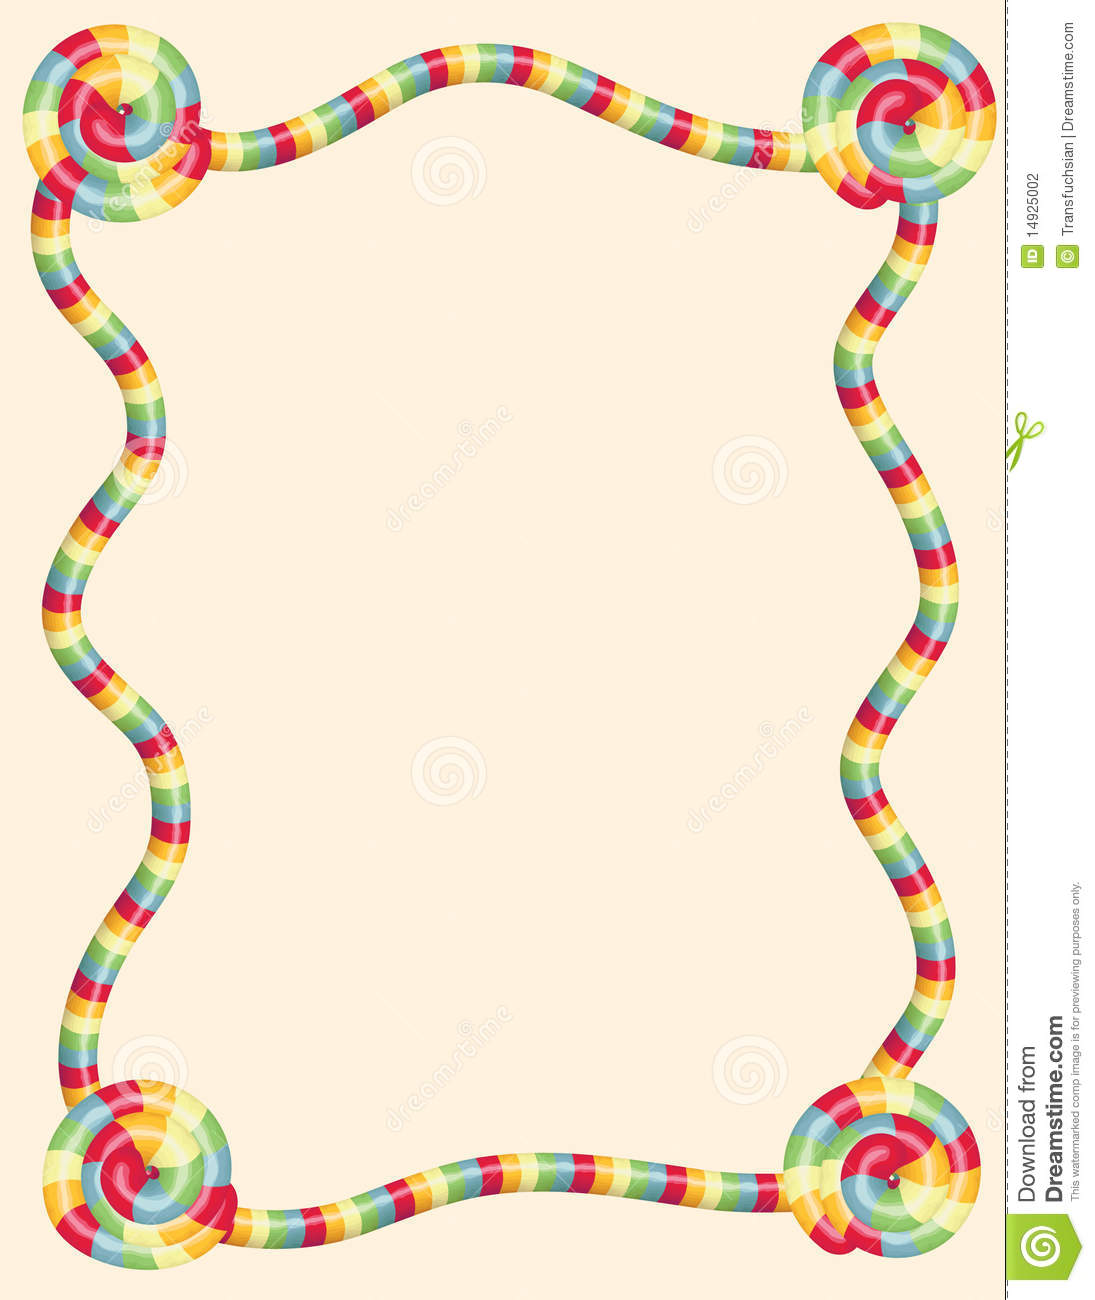 Colorful Twisted Candy Border Stock Photography   Image  14925002